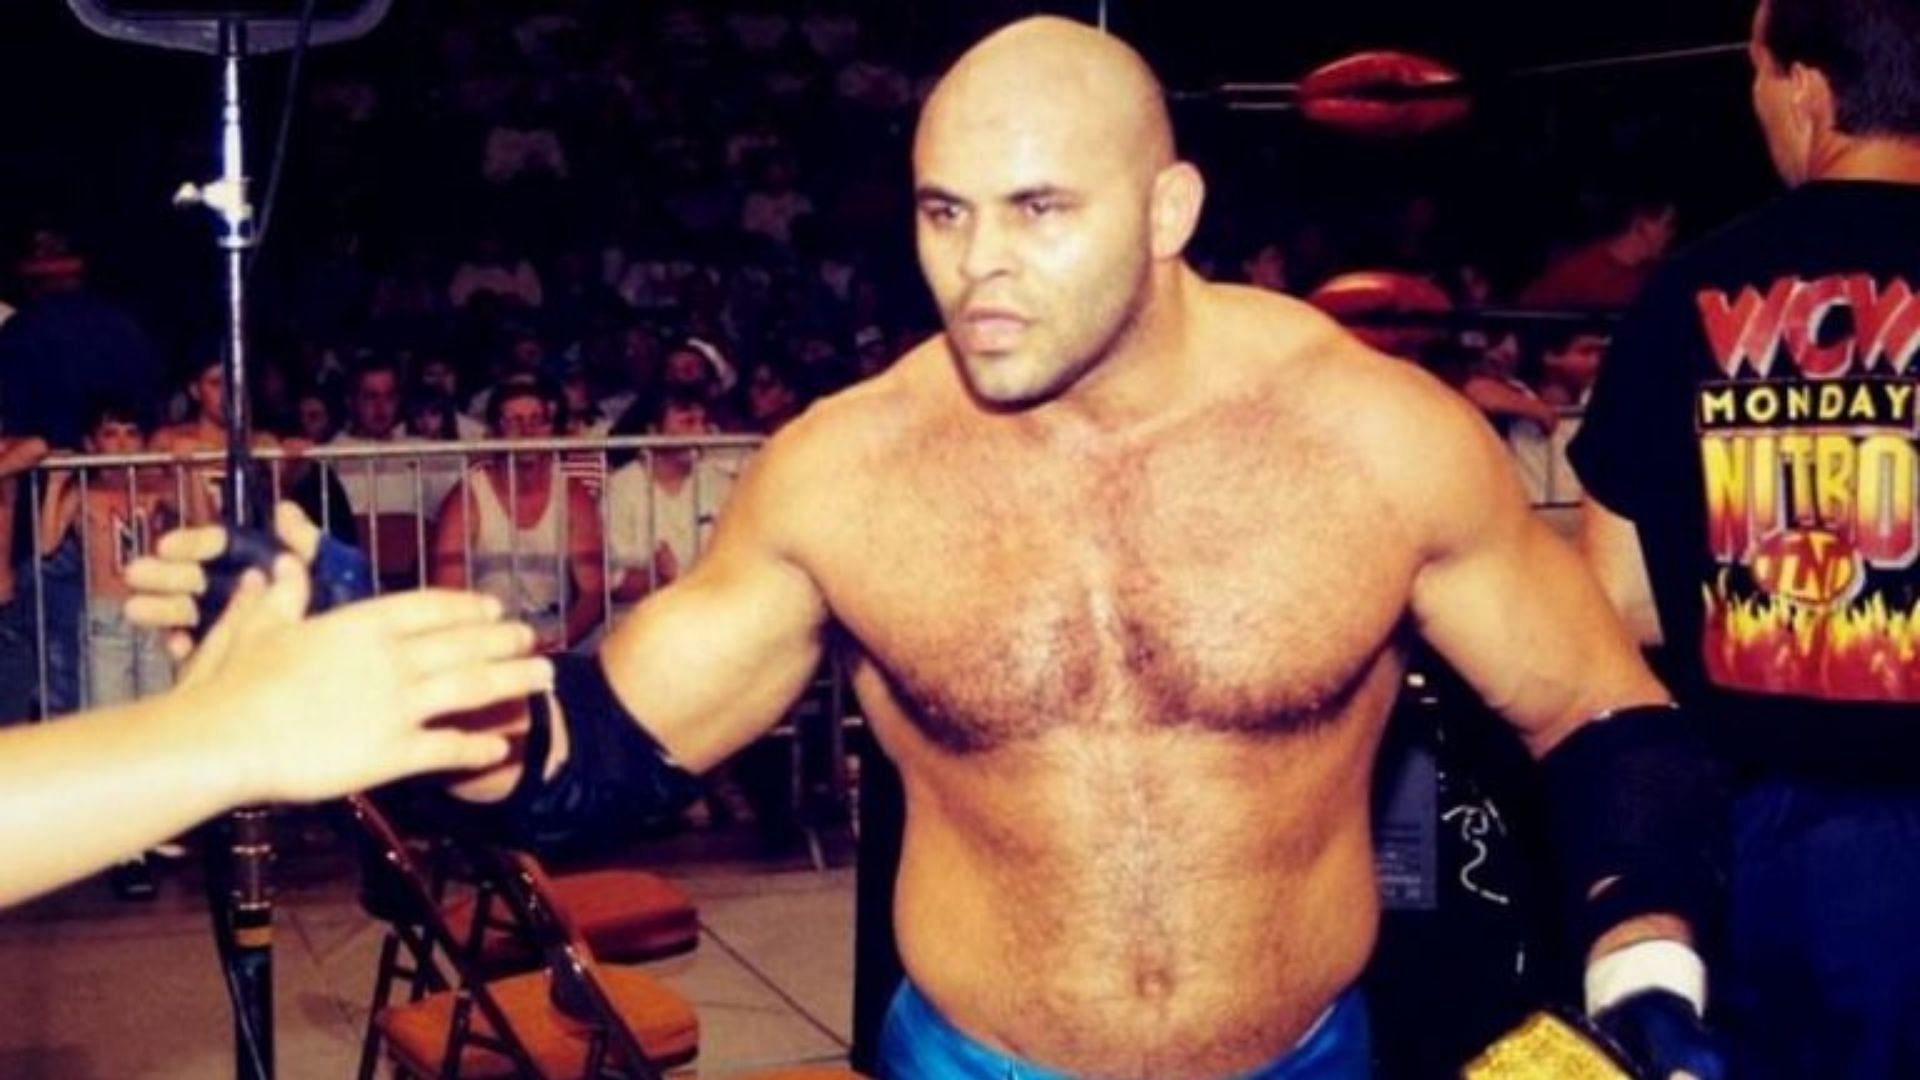 Konnan at a WCW event in the 1990s